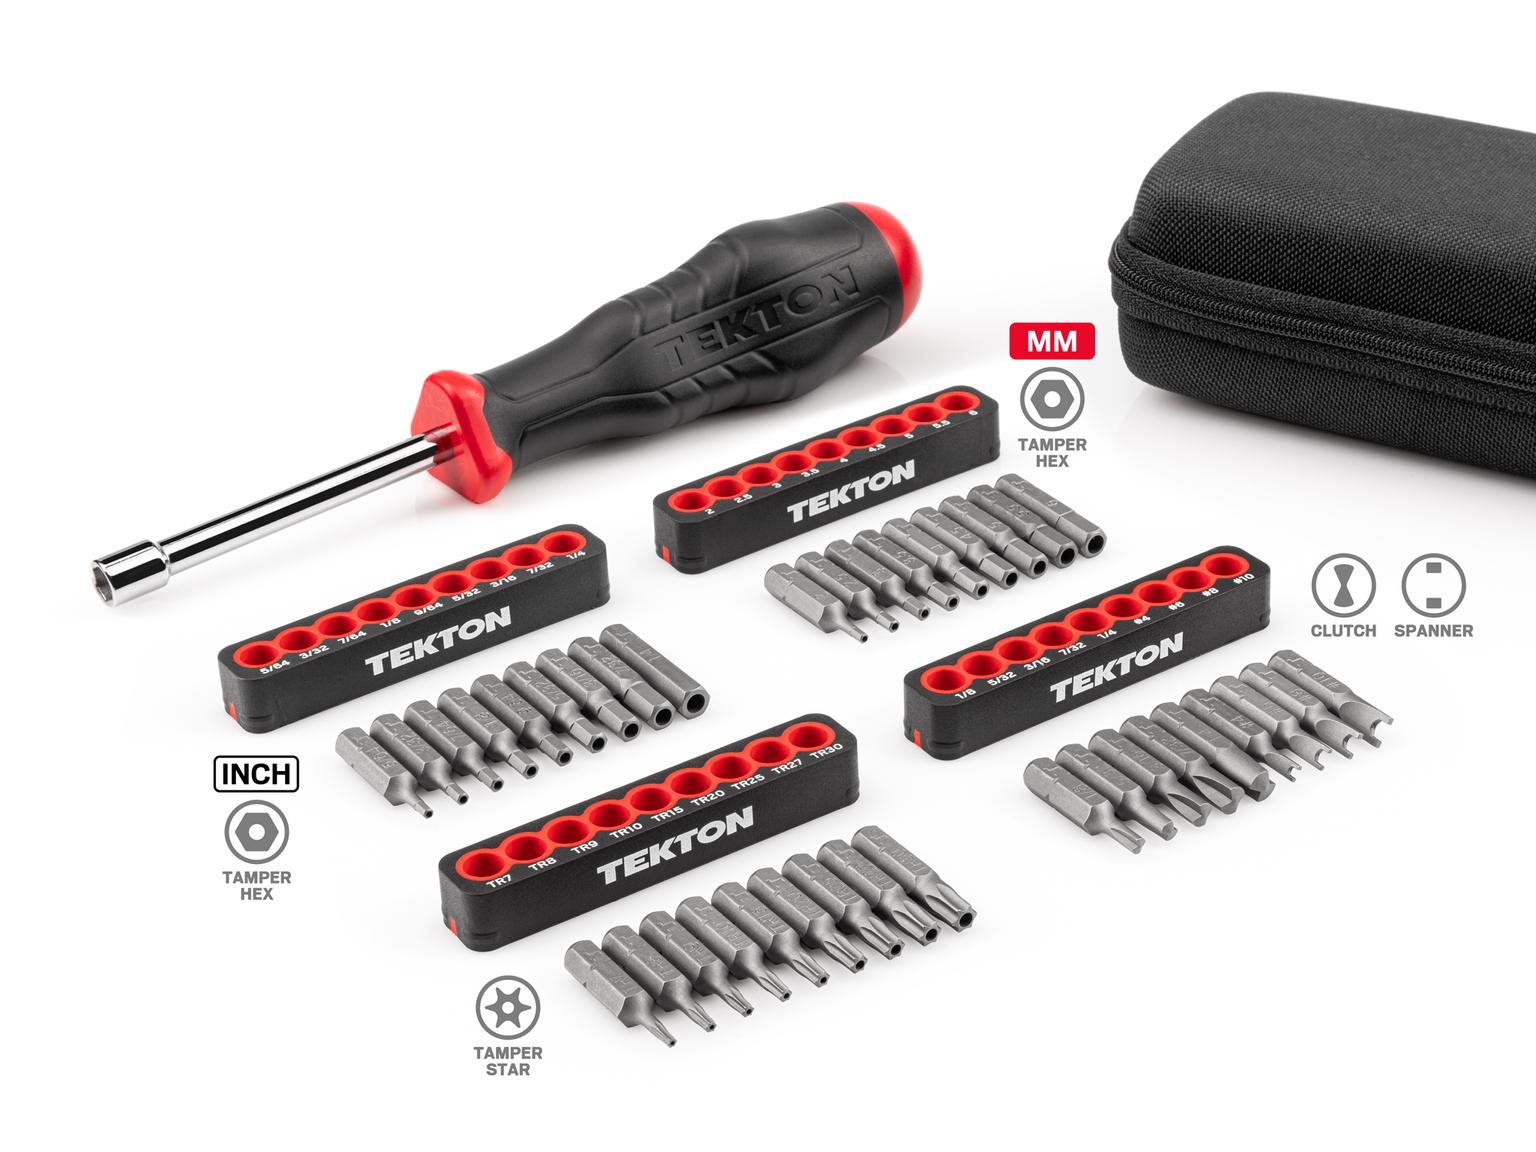 TEKTON DBH93102-T 1/4 Inch Security Bit Driver and Bit Set with Case, 37-Piece